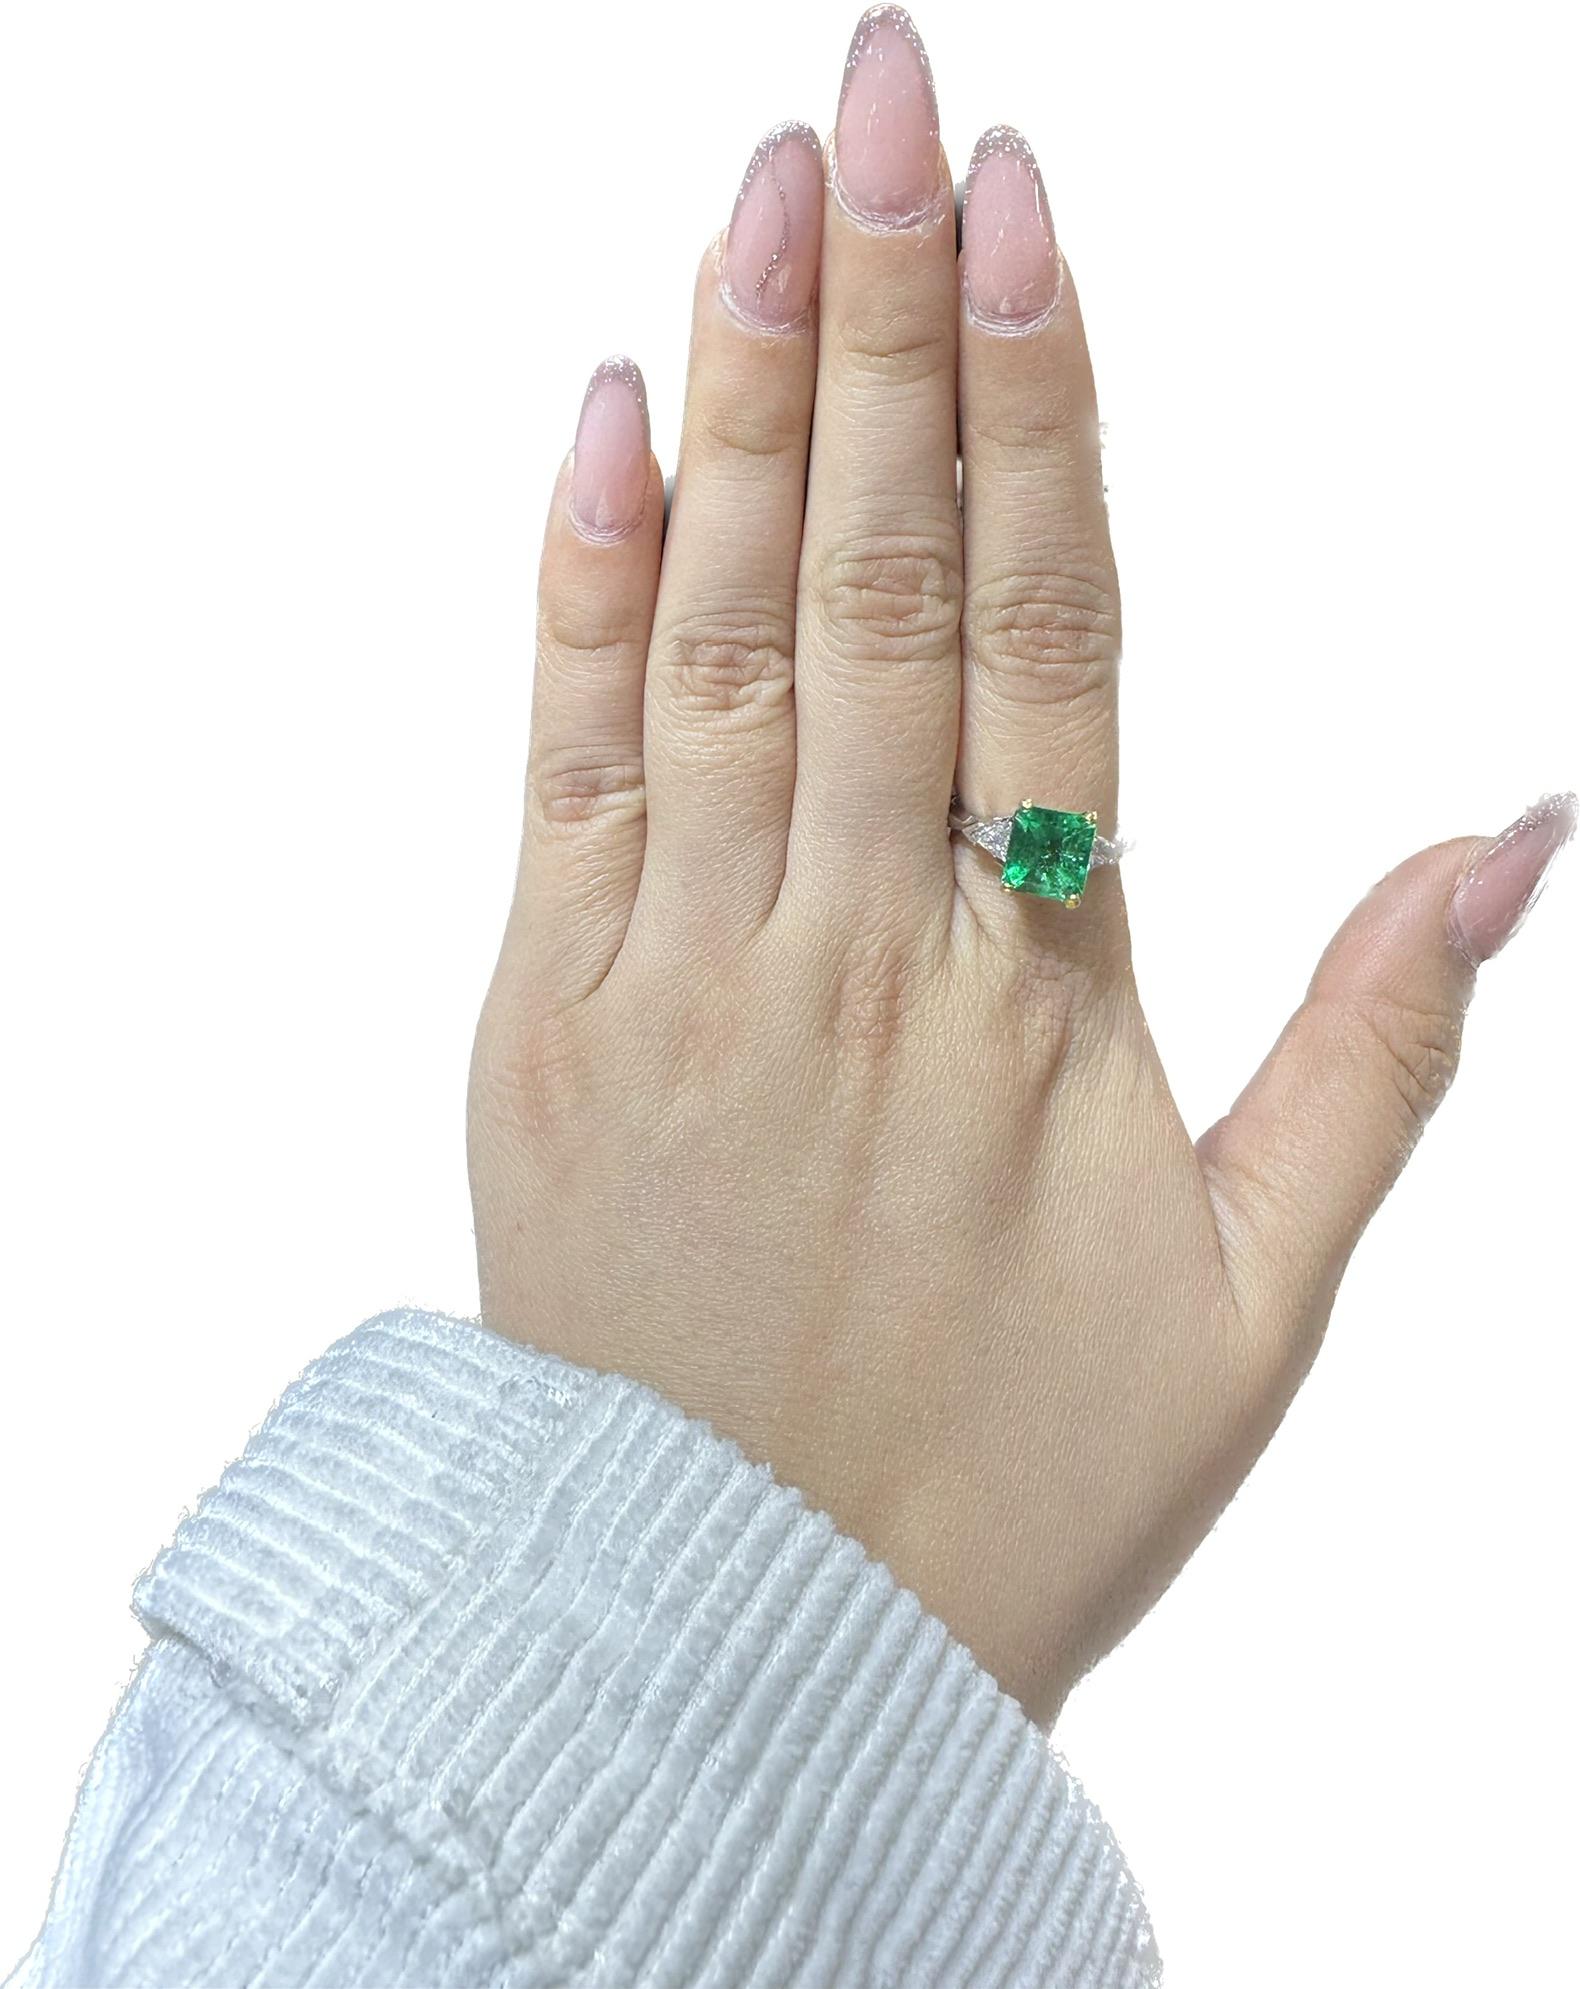 2.7 Carat Emerald Cut Colombian Emerald & 0.60Ct Diamond Ring 18K White/Y Gold For Sale 9